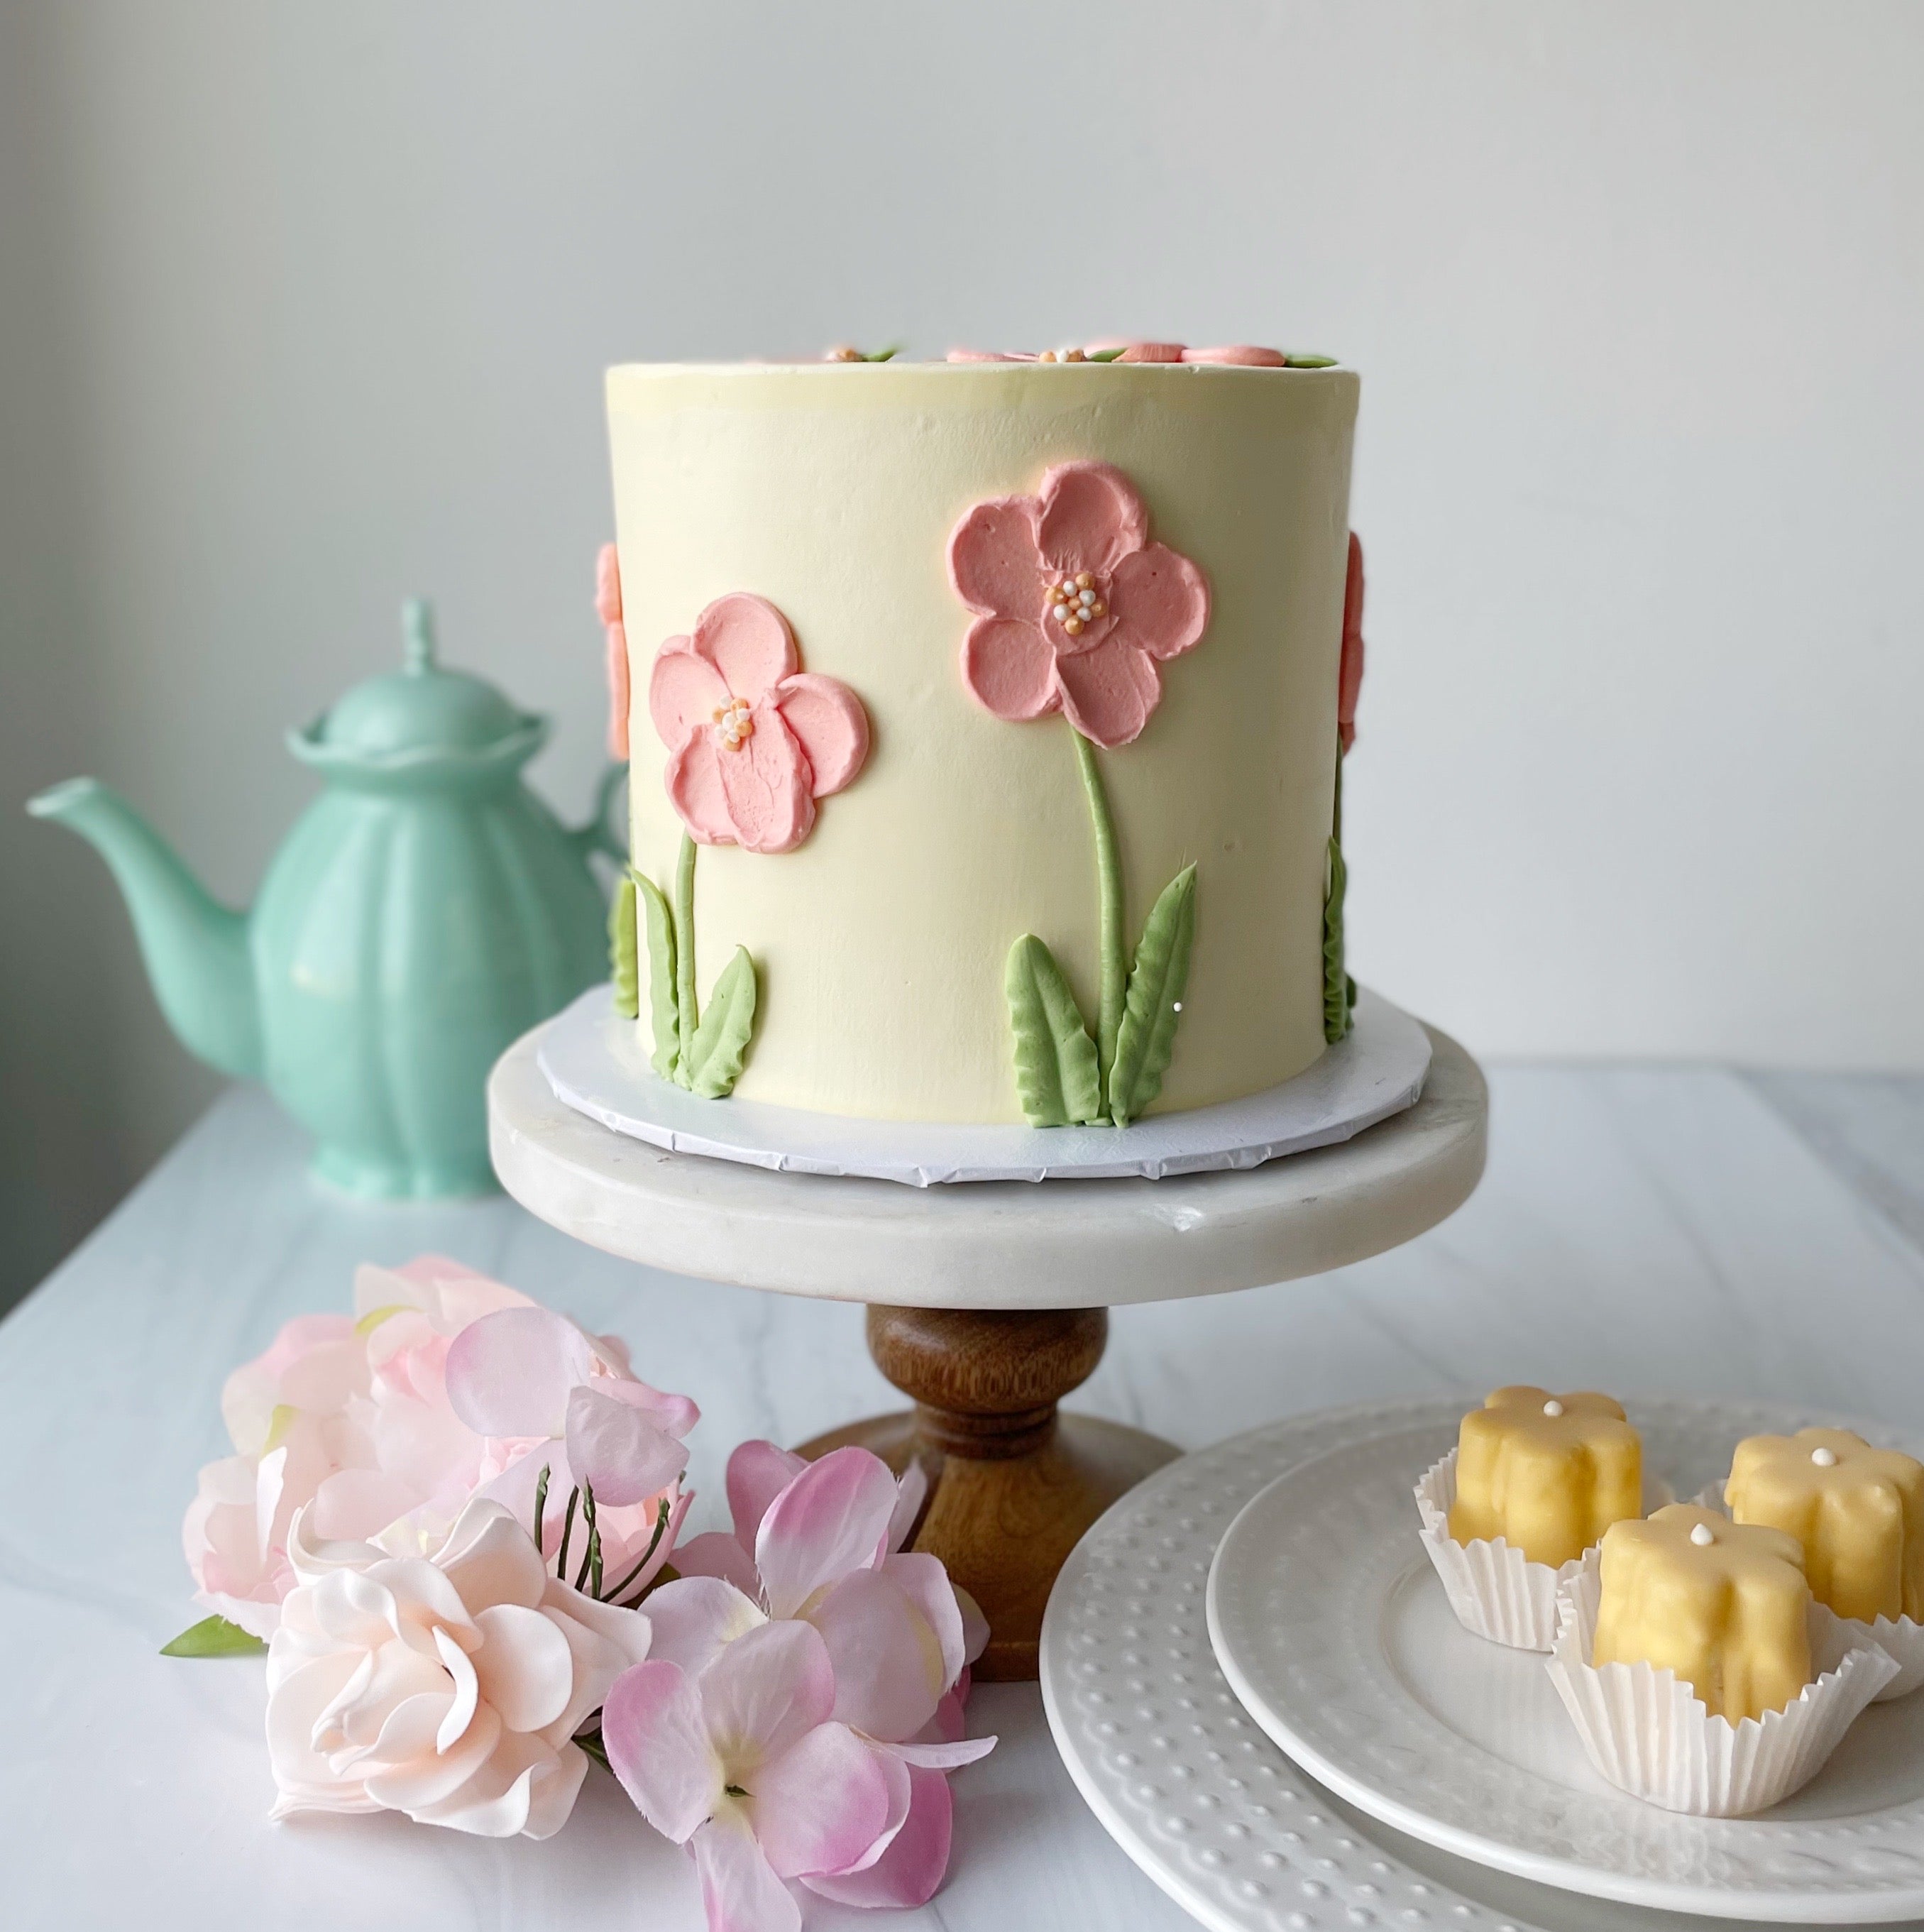 Celebrity Wedding Cakes: Pictures To Inspire Your Own Wedding Cake Design |  Marie Claire UK